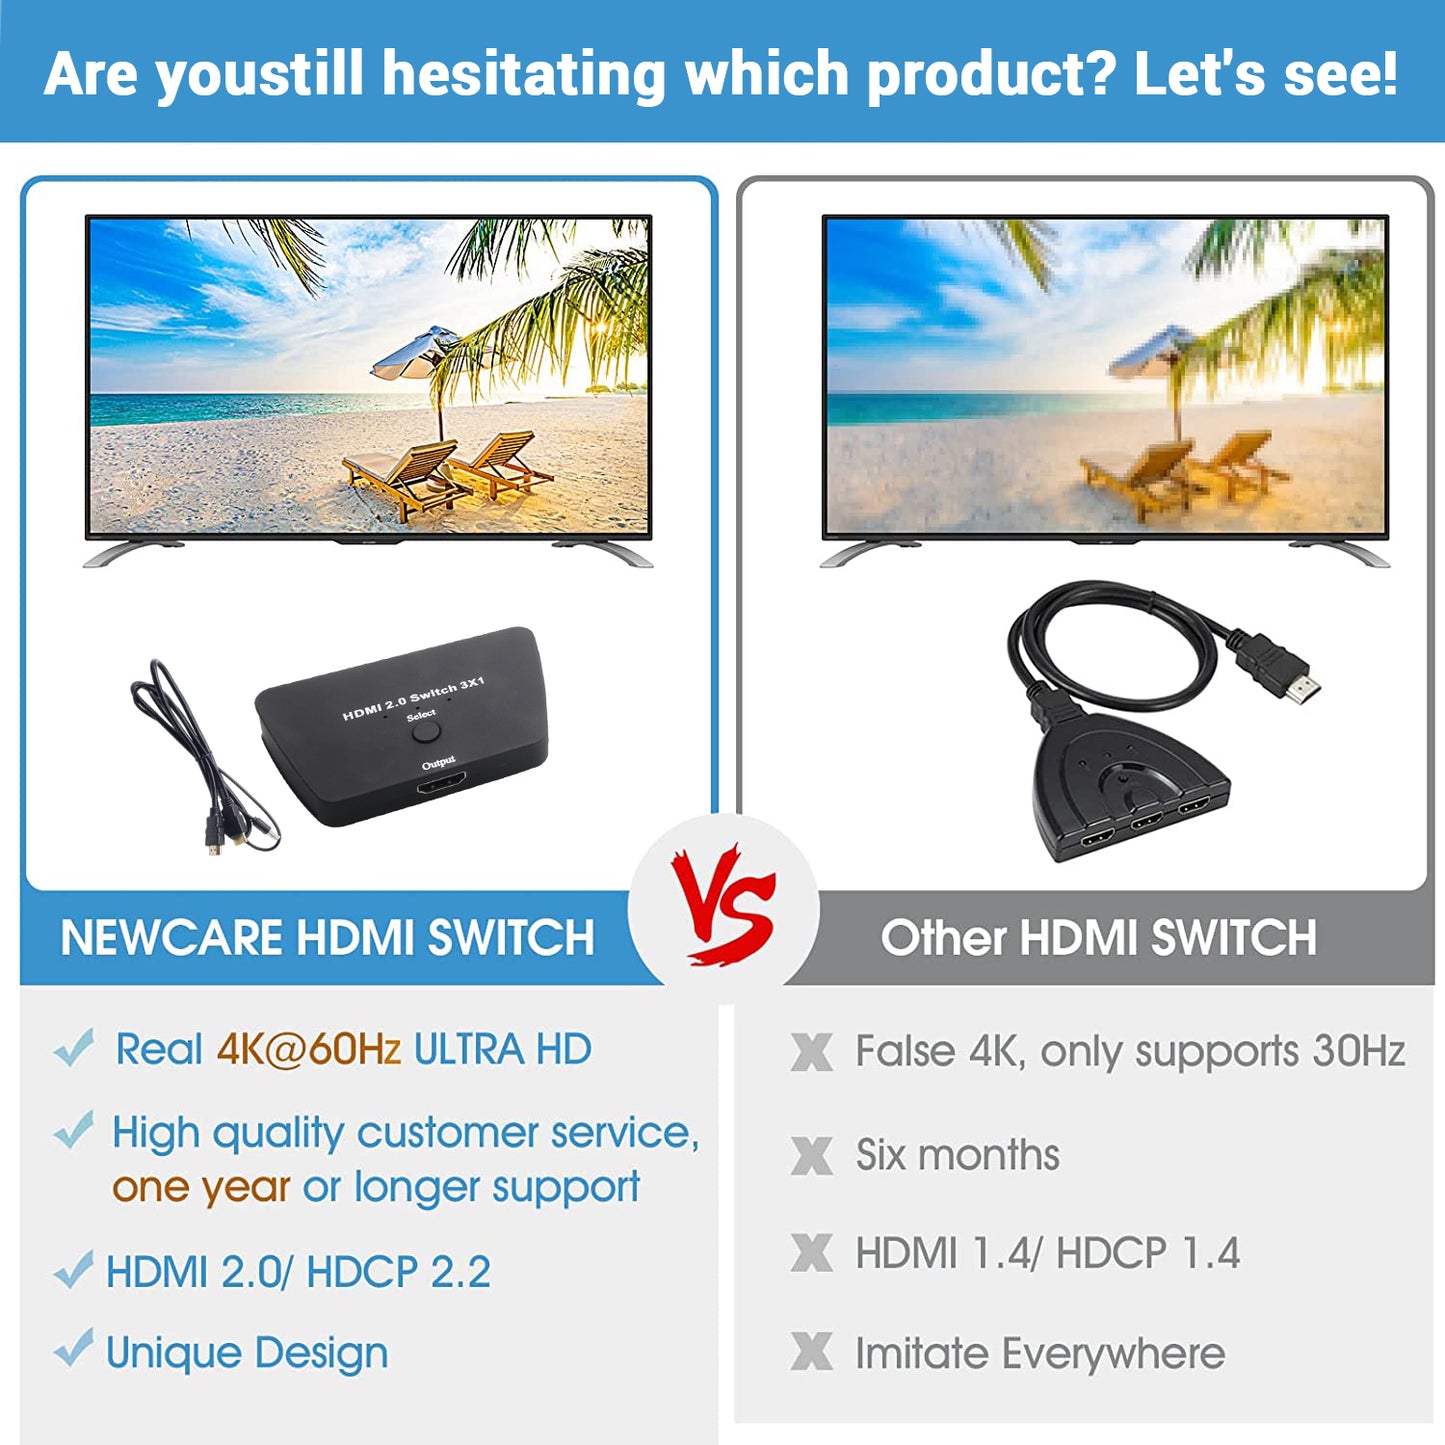 Verilux 4K@60Hz HDMI Switch,4K 60hz HDMI Splitter,Support HDCP2.2,HDR,1080P 3D,HDMI Switcher 3 in 1 Out for Fire Stick,PS5,Sky Box,X Box,Games Consoles,DVD,PC,Roku,fire Cube Etc